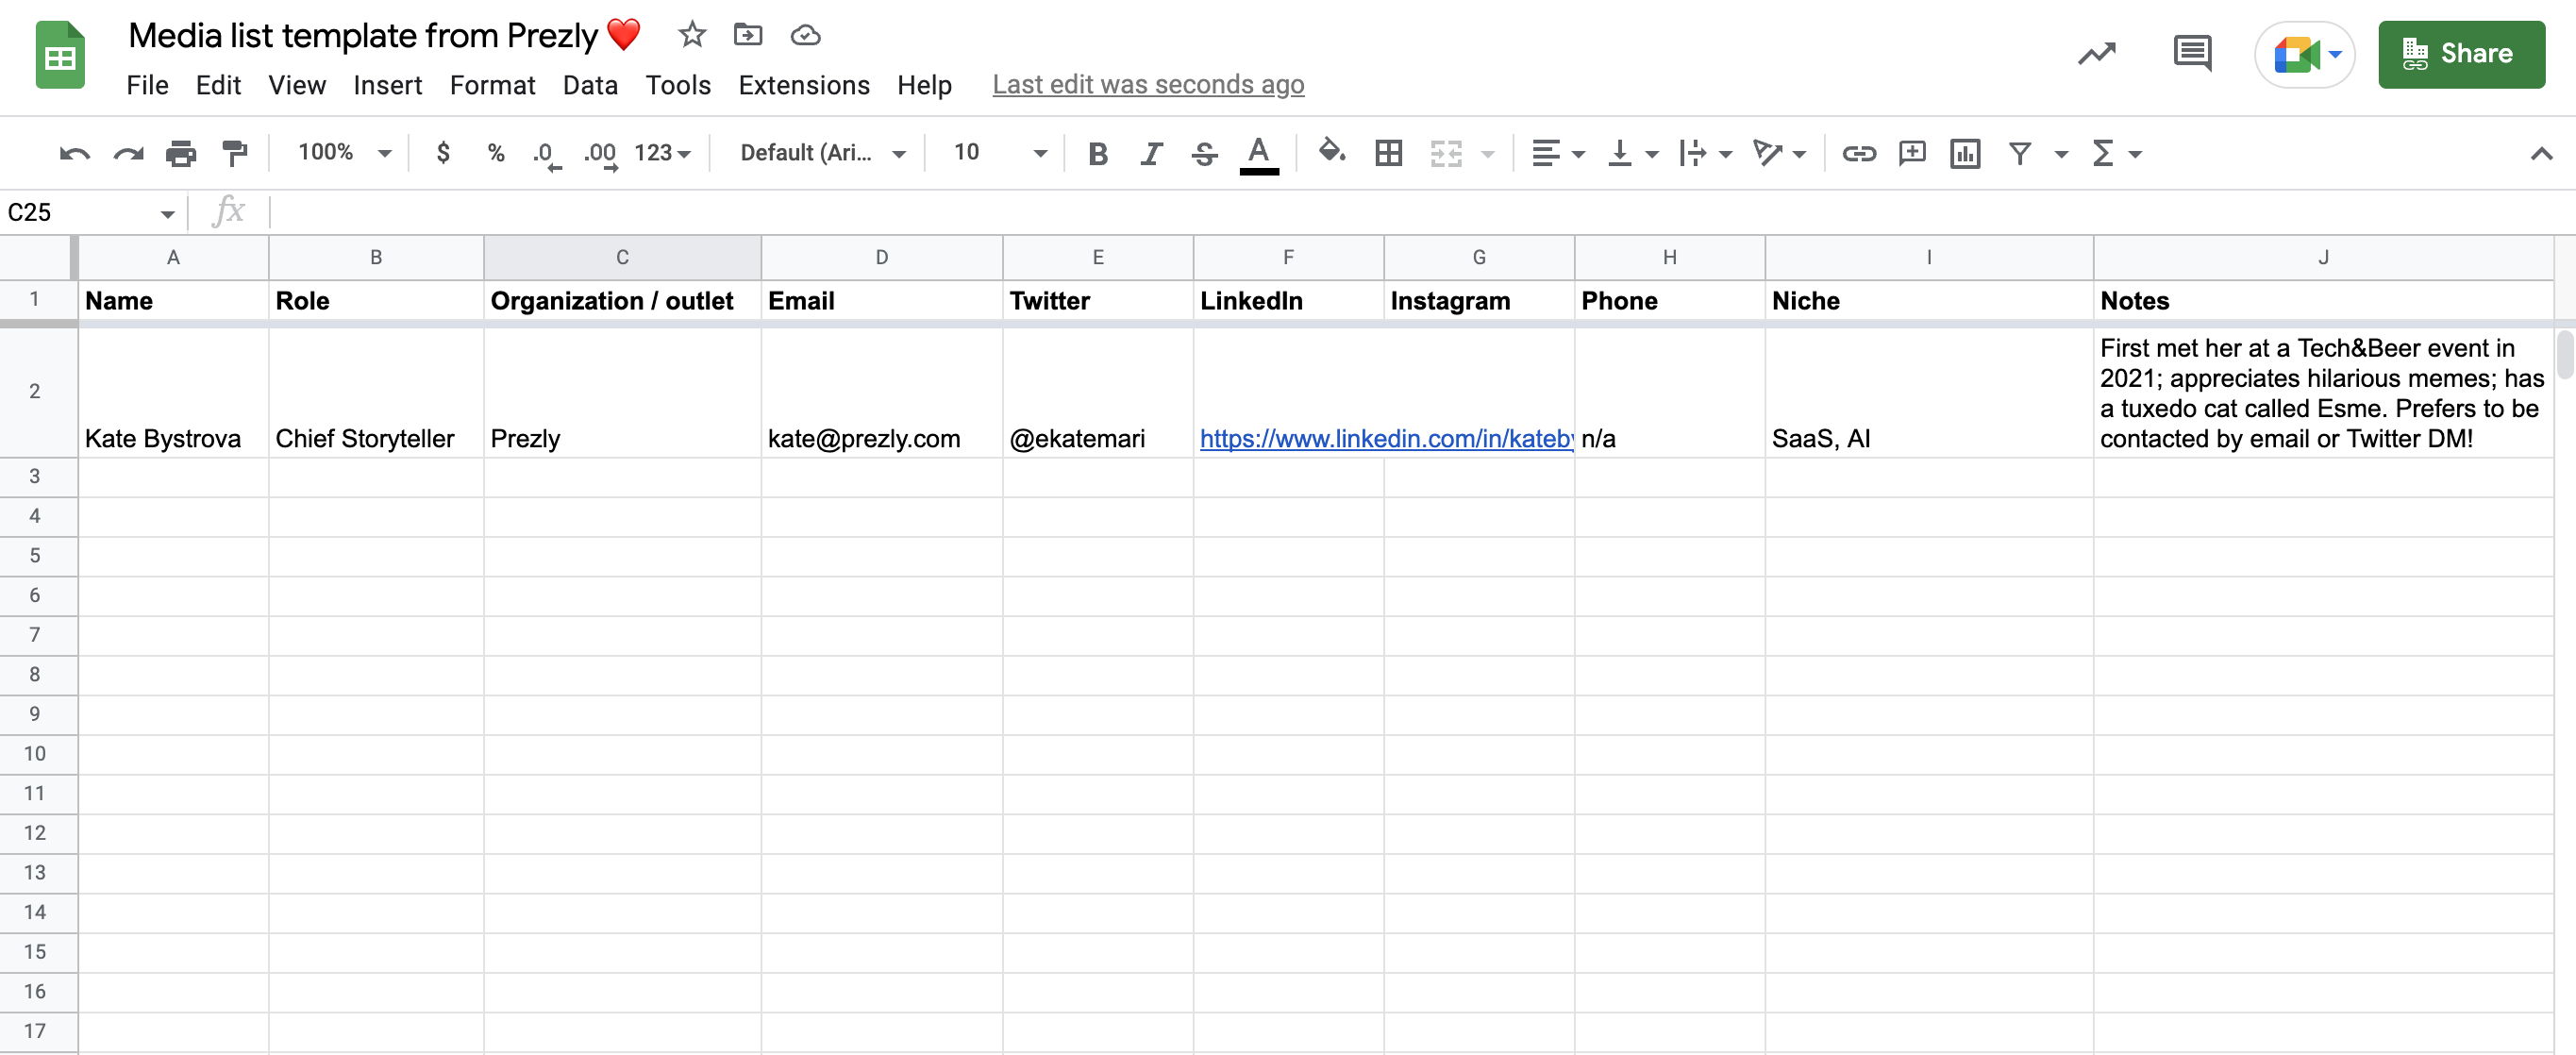 [browser] Click to open the Google Sheets media list template, and select File > Copy to use